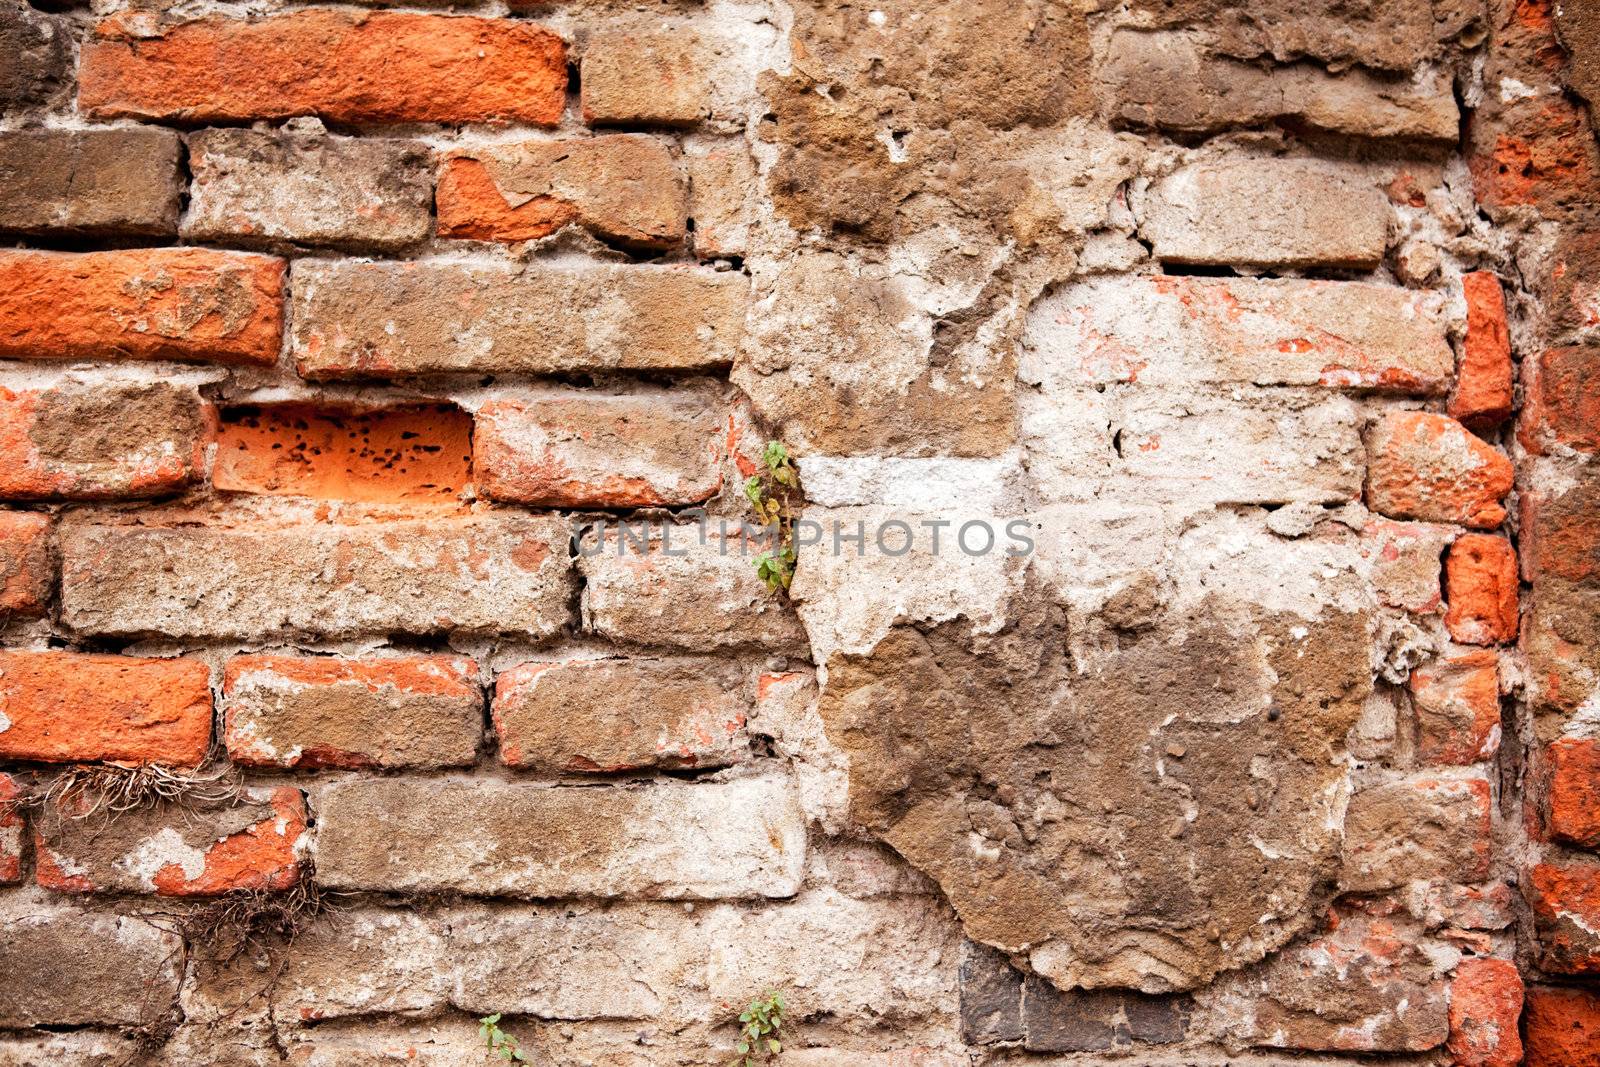 A background texture of a brick wall